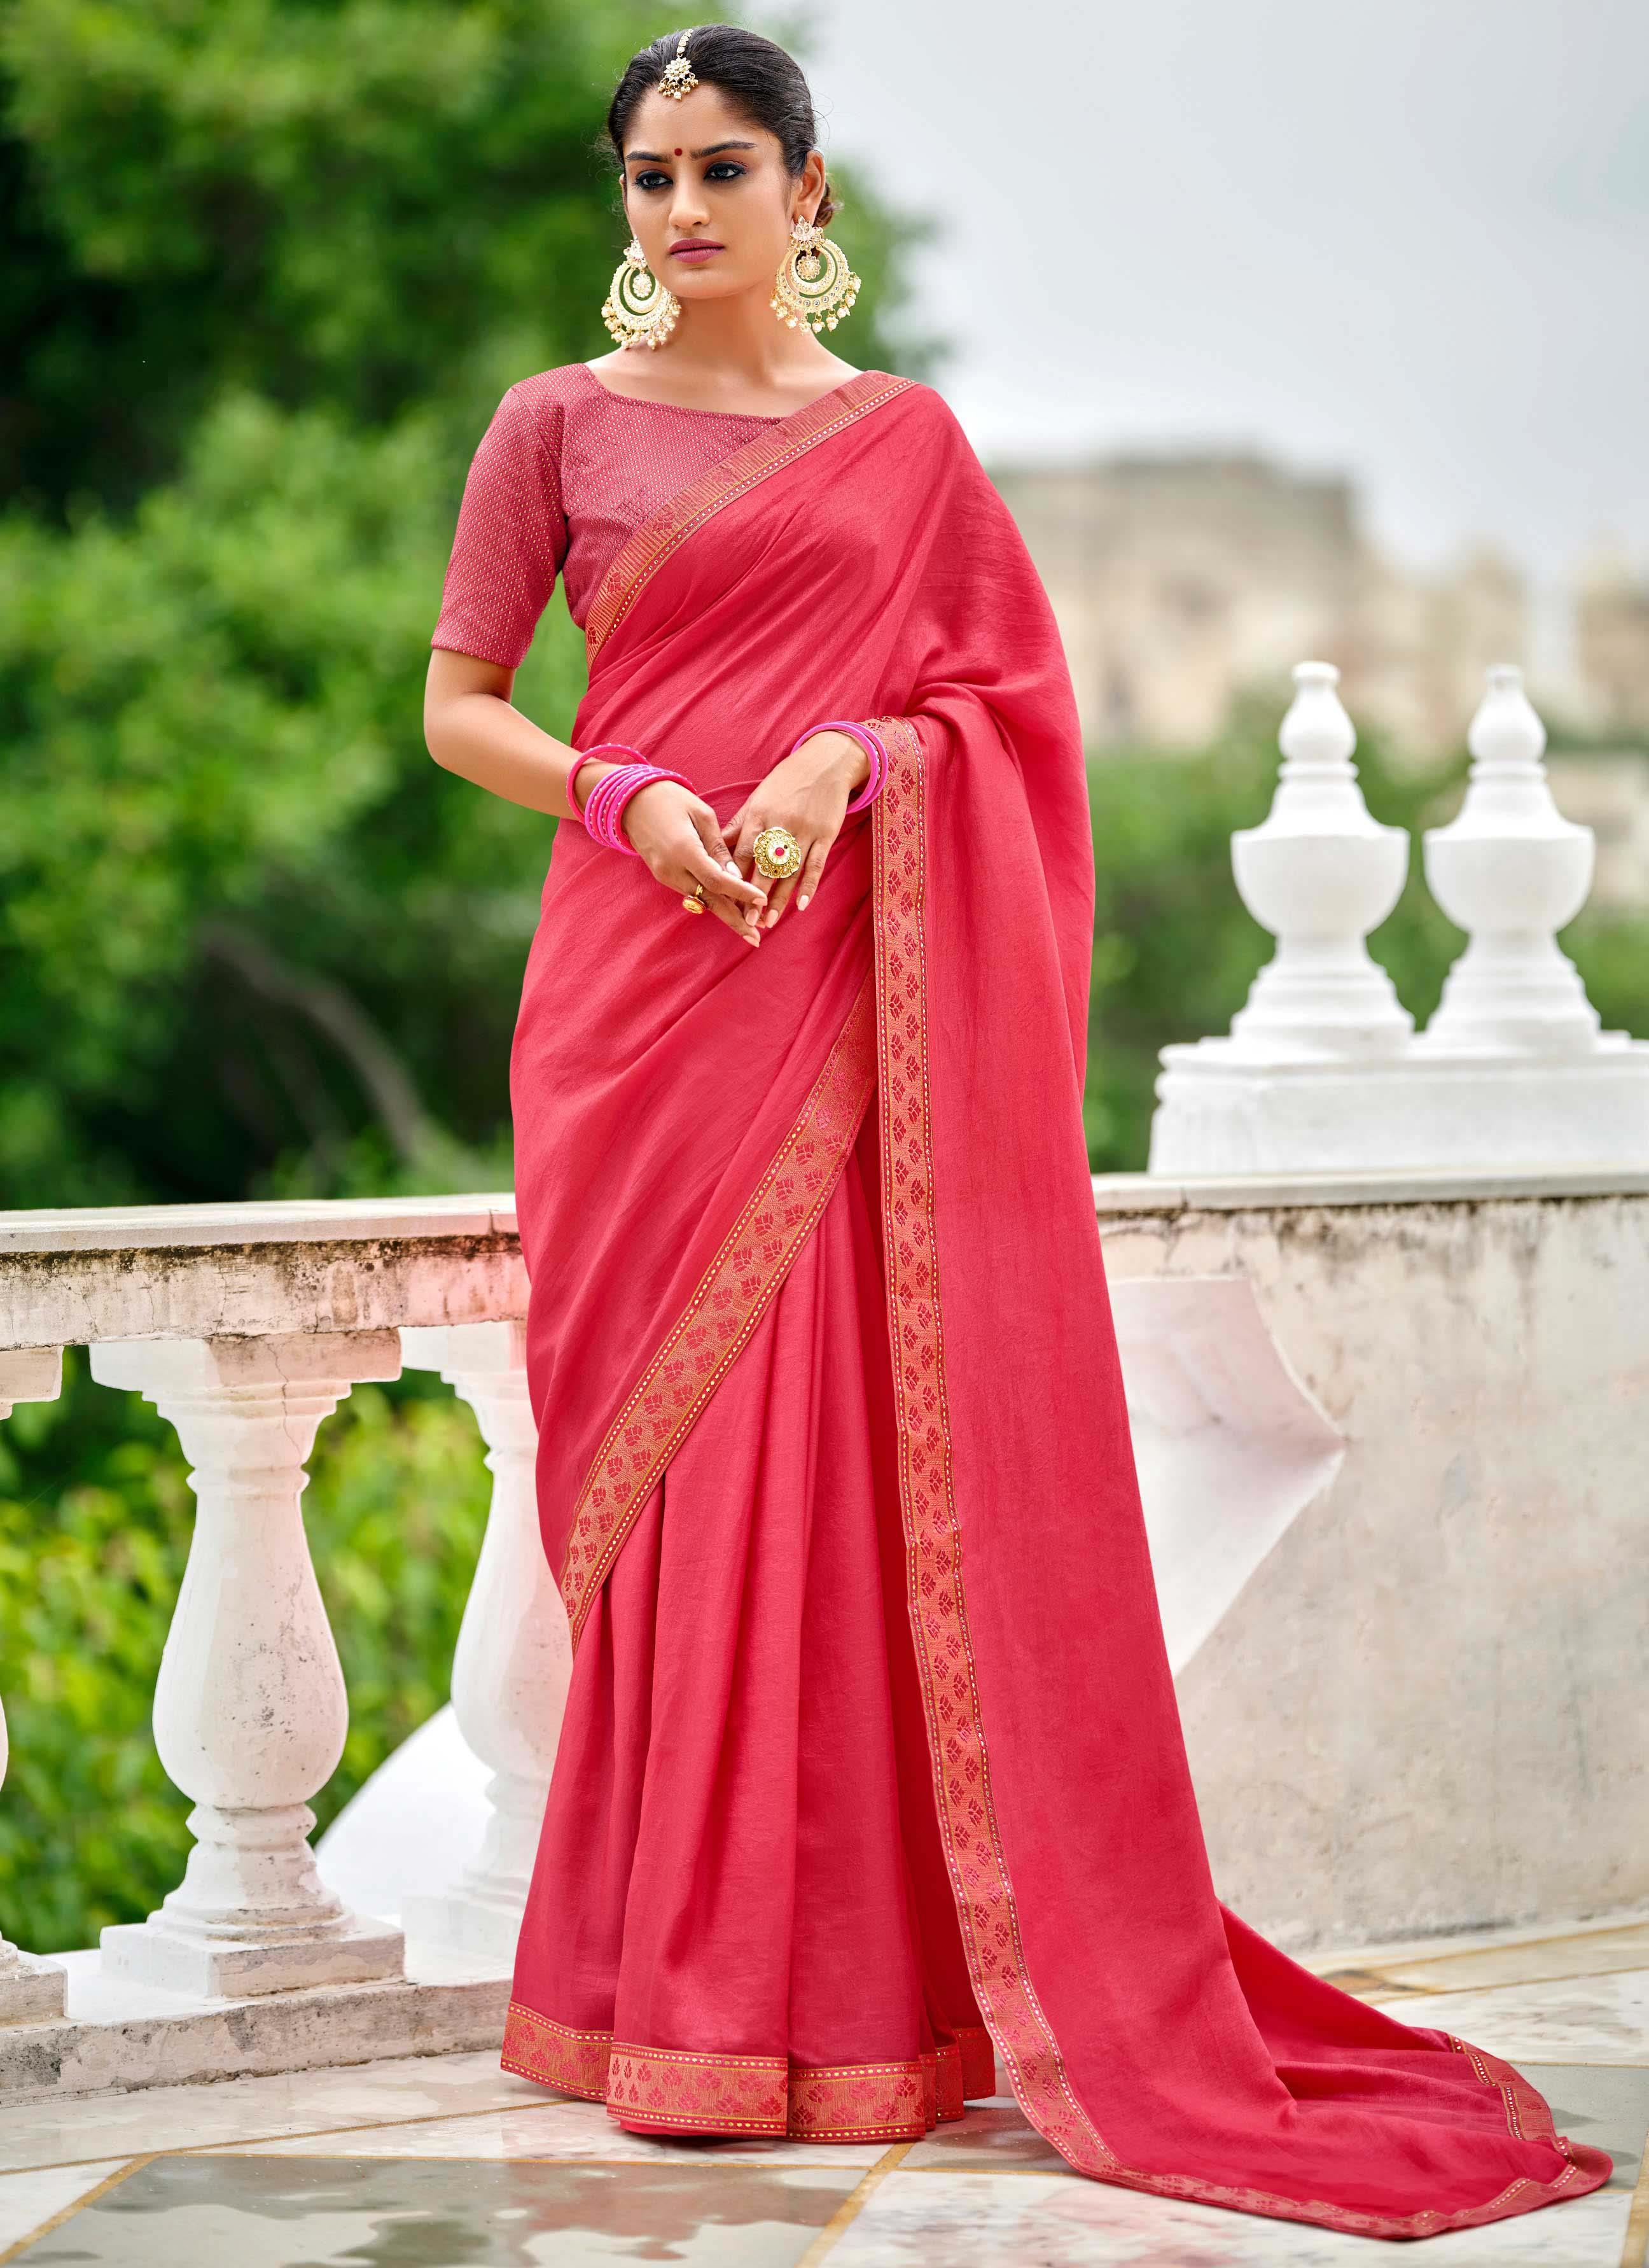 Plain Blouses With Silk Sarees- A Classy Pairing